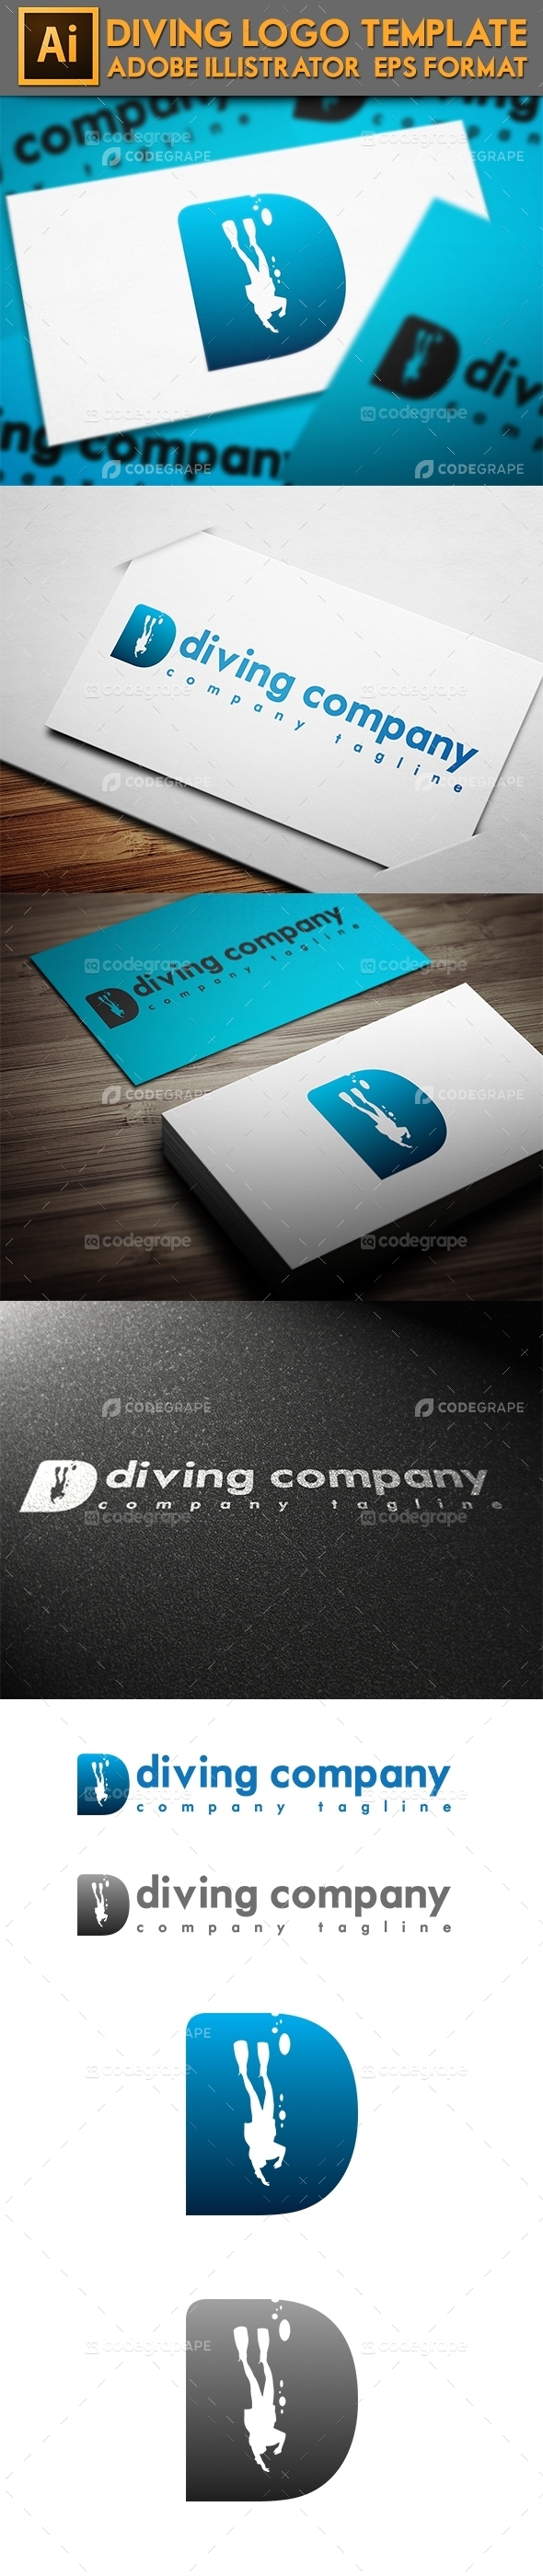 Diving Company Logo Template